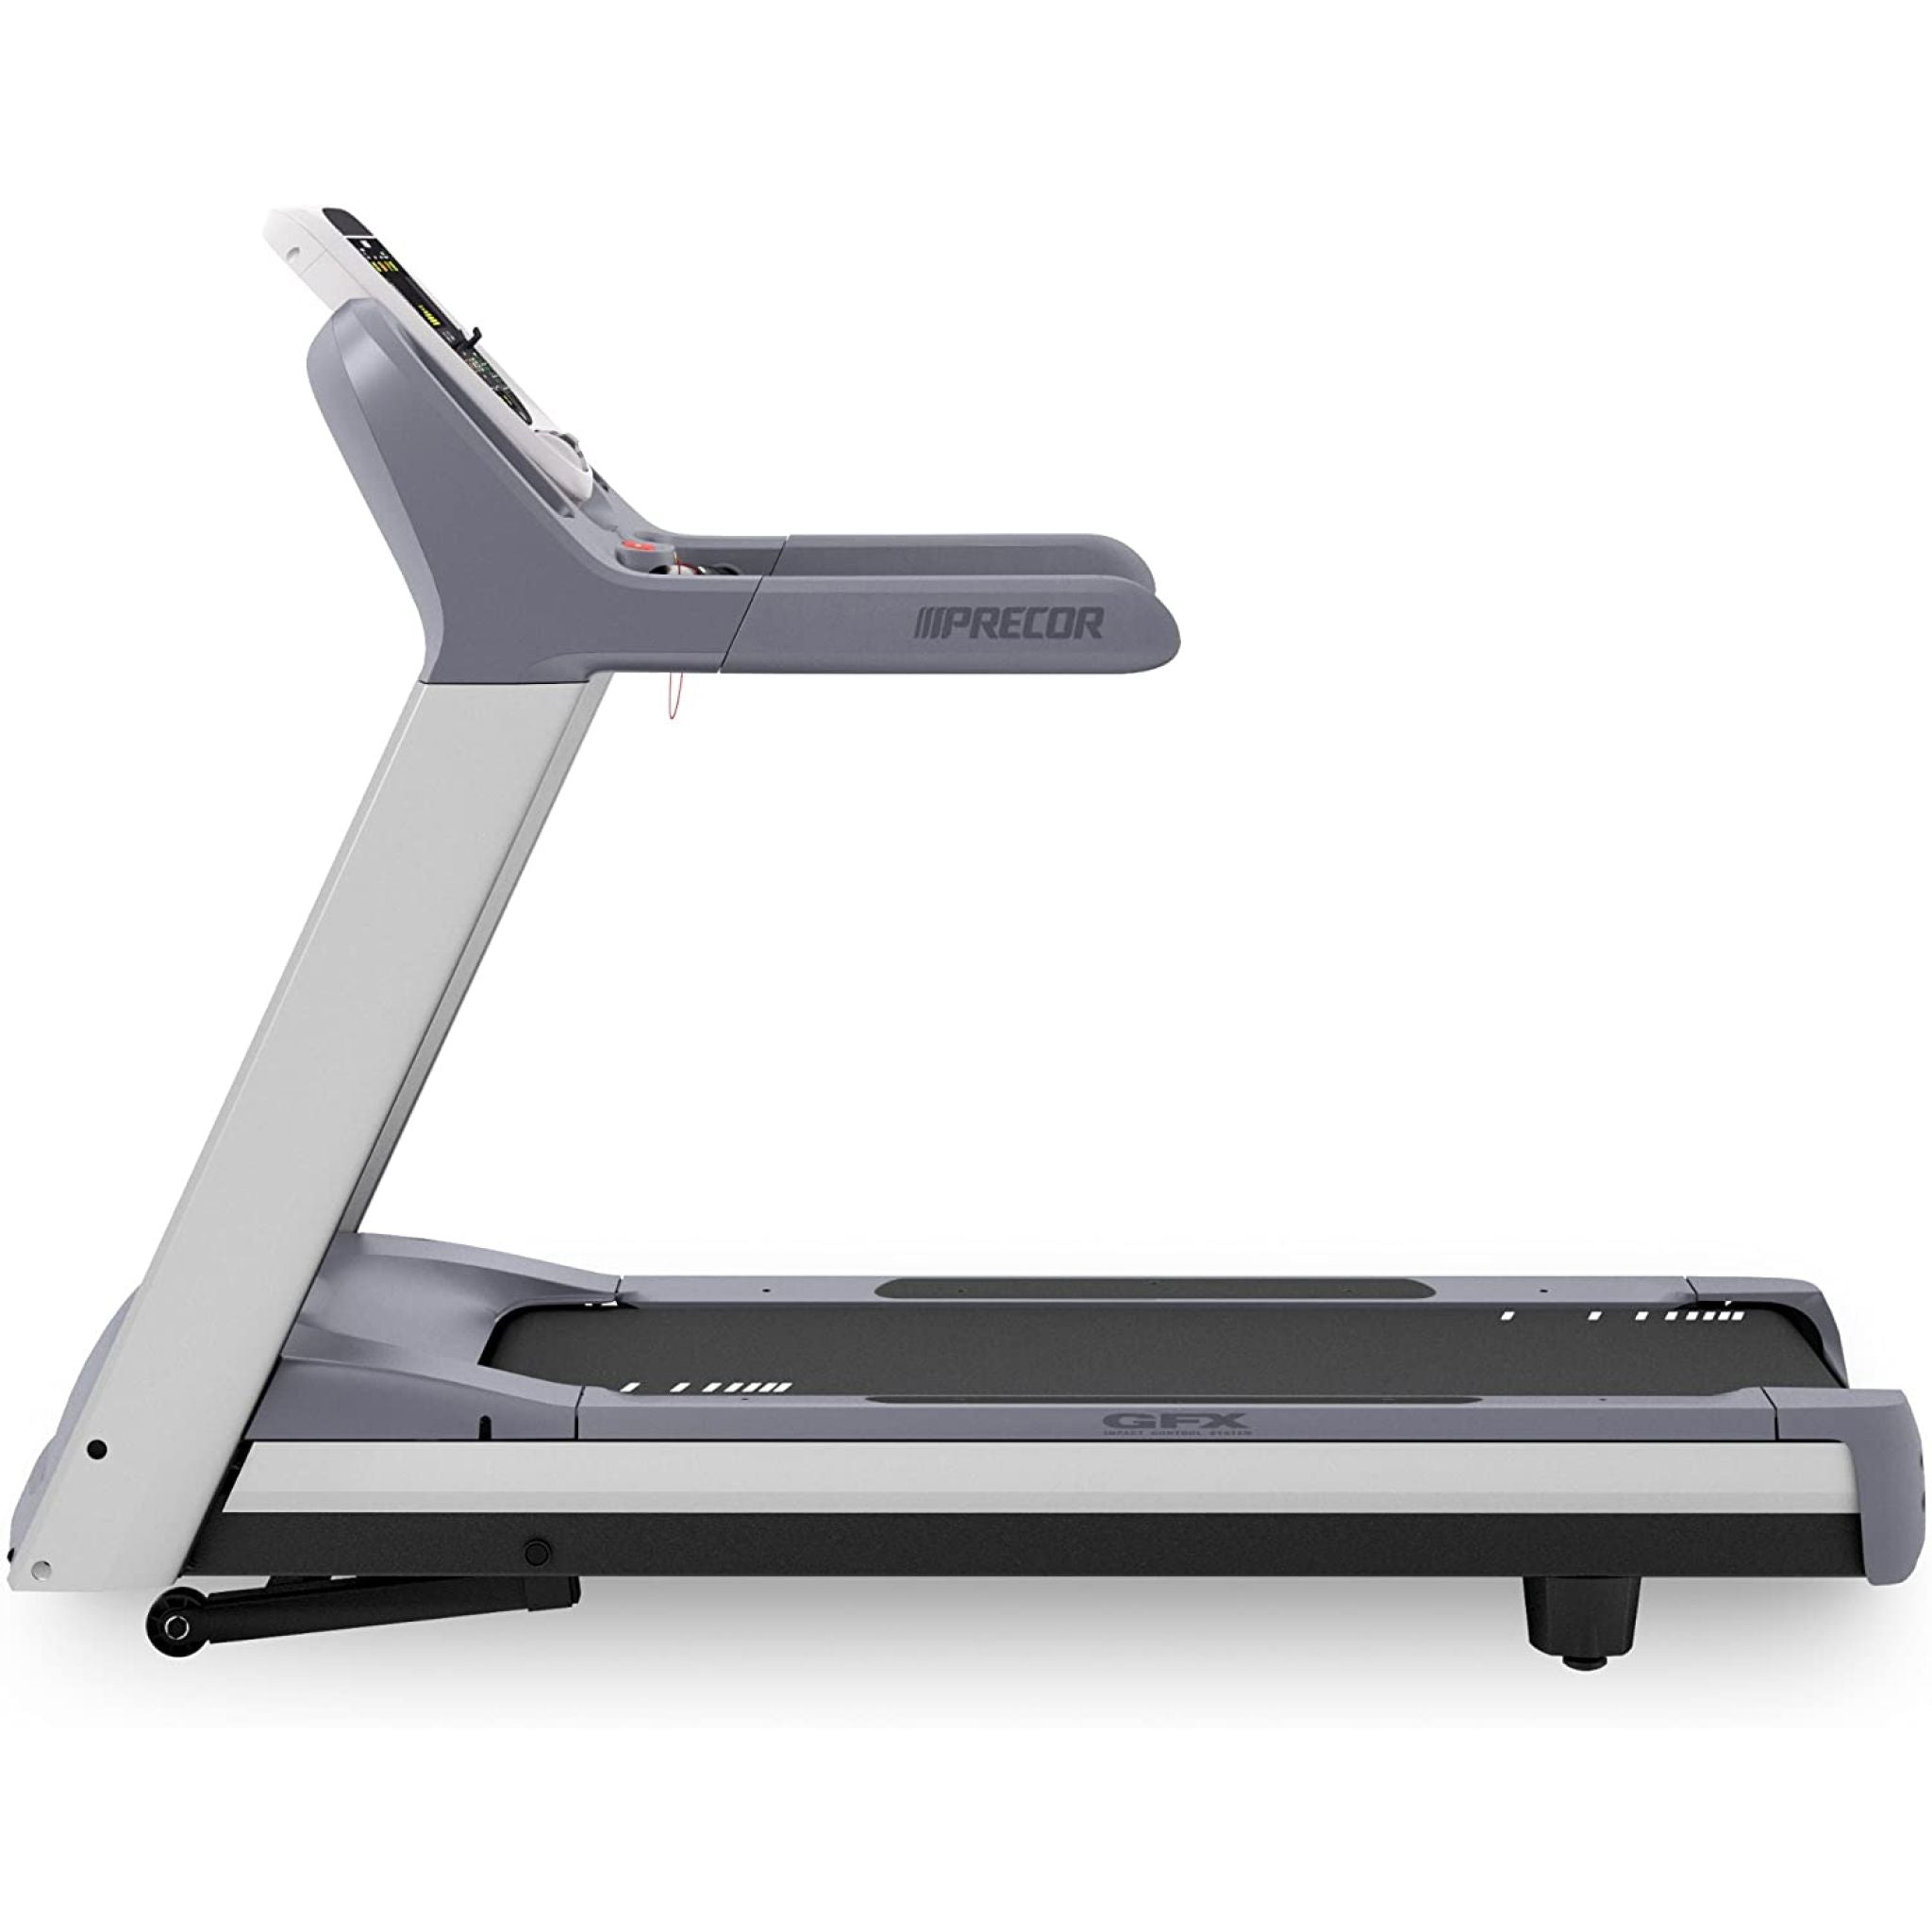 Lefthand view of the Precor TRM 833 Treadmill with P30 Console